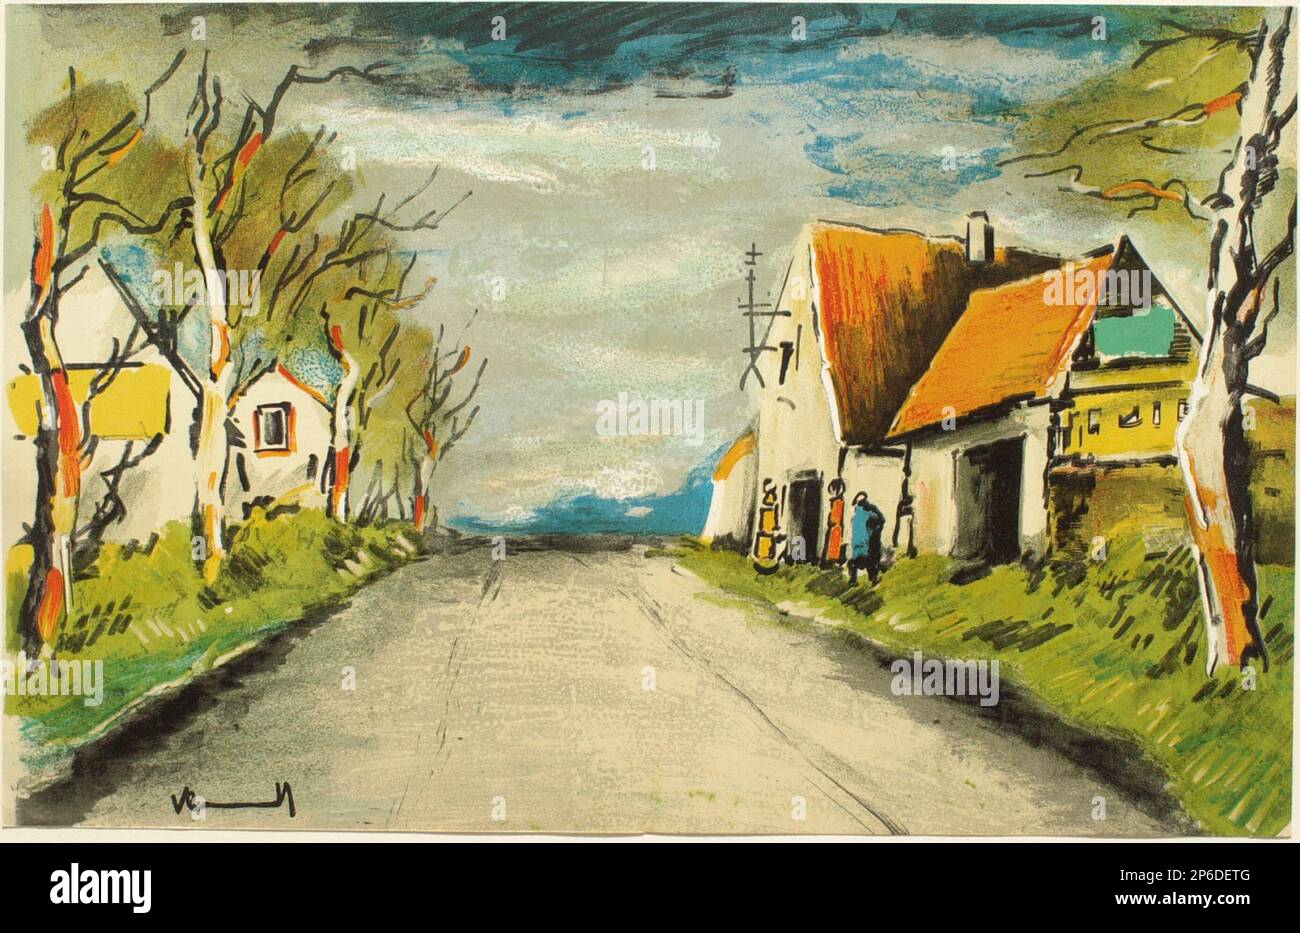 Maurice de Vlaminck, The Road, 1957, lithograph on paper. Stock Photo